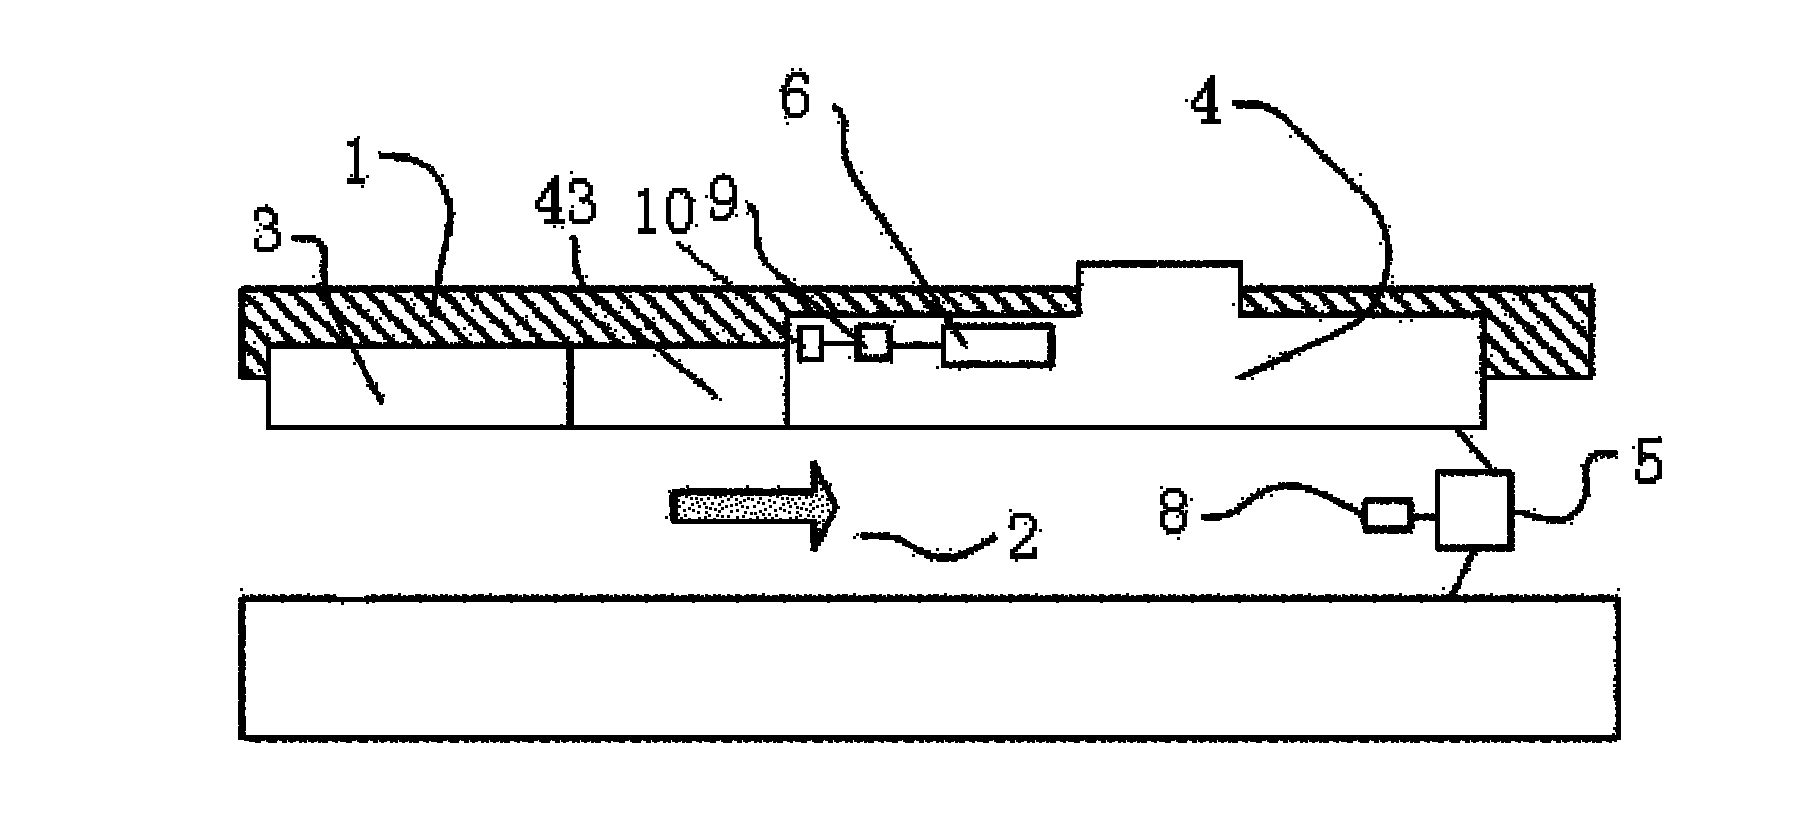 Pressure-while-drilling measuring device and measurement method thereof